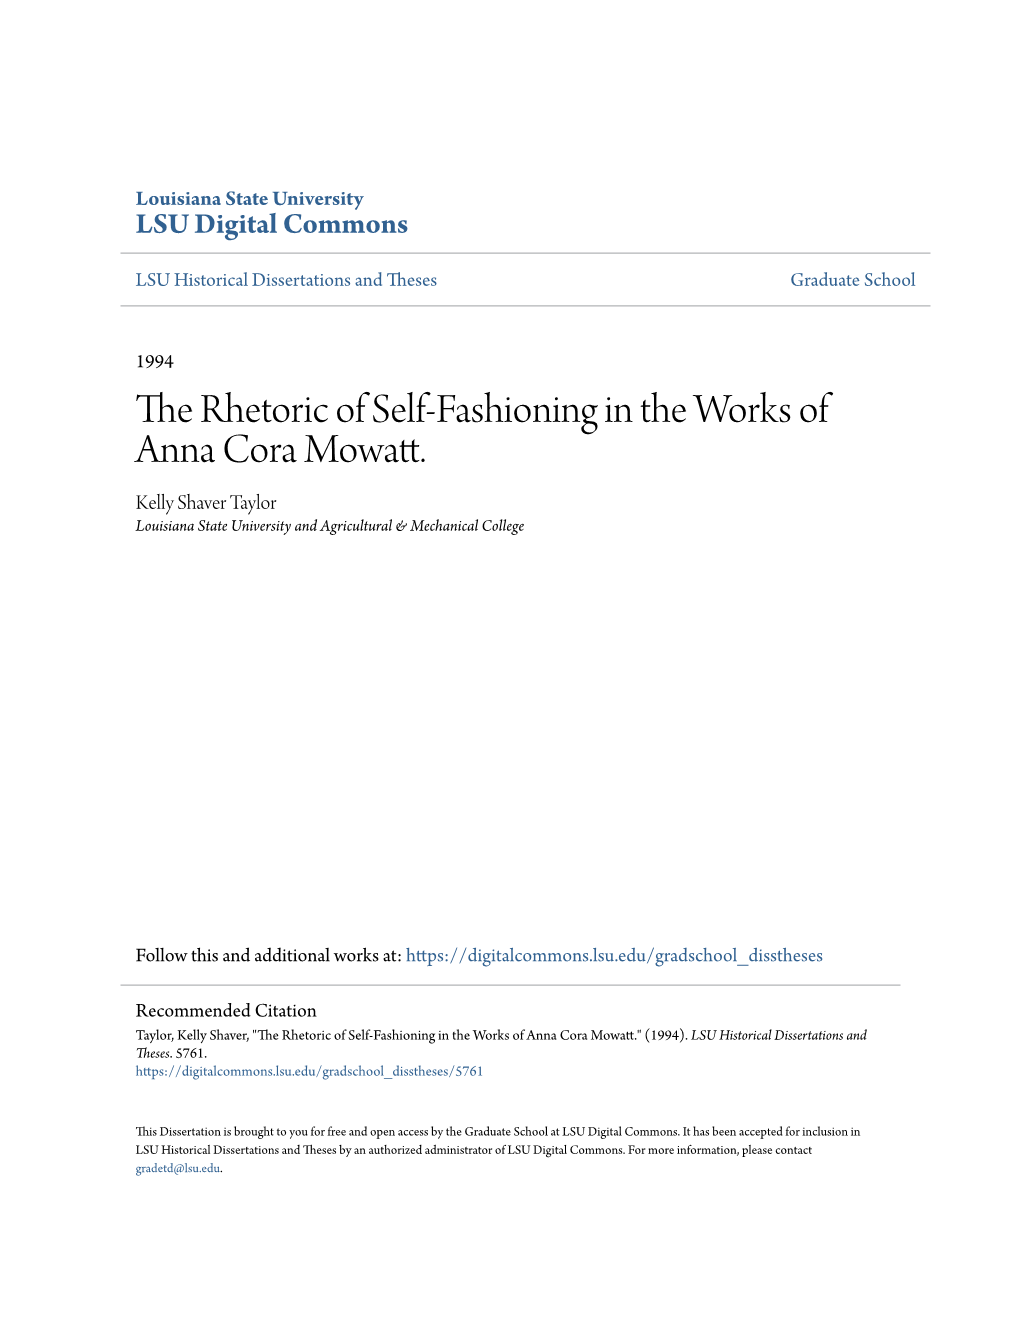 The Rhetoric of Self-Fashioning in the Works of Anna Cora Mowatt. Kelly Shaver Taylor Louisiana State University and Agricultural & Mechanical College